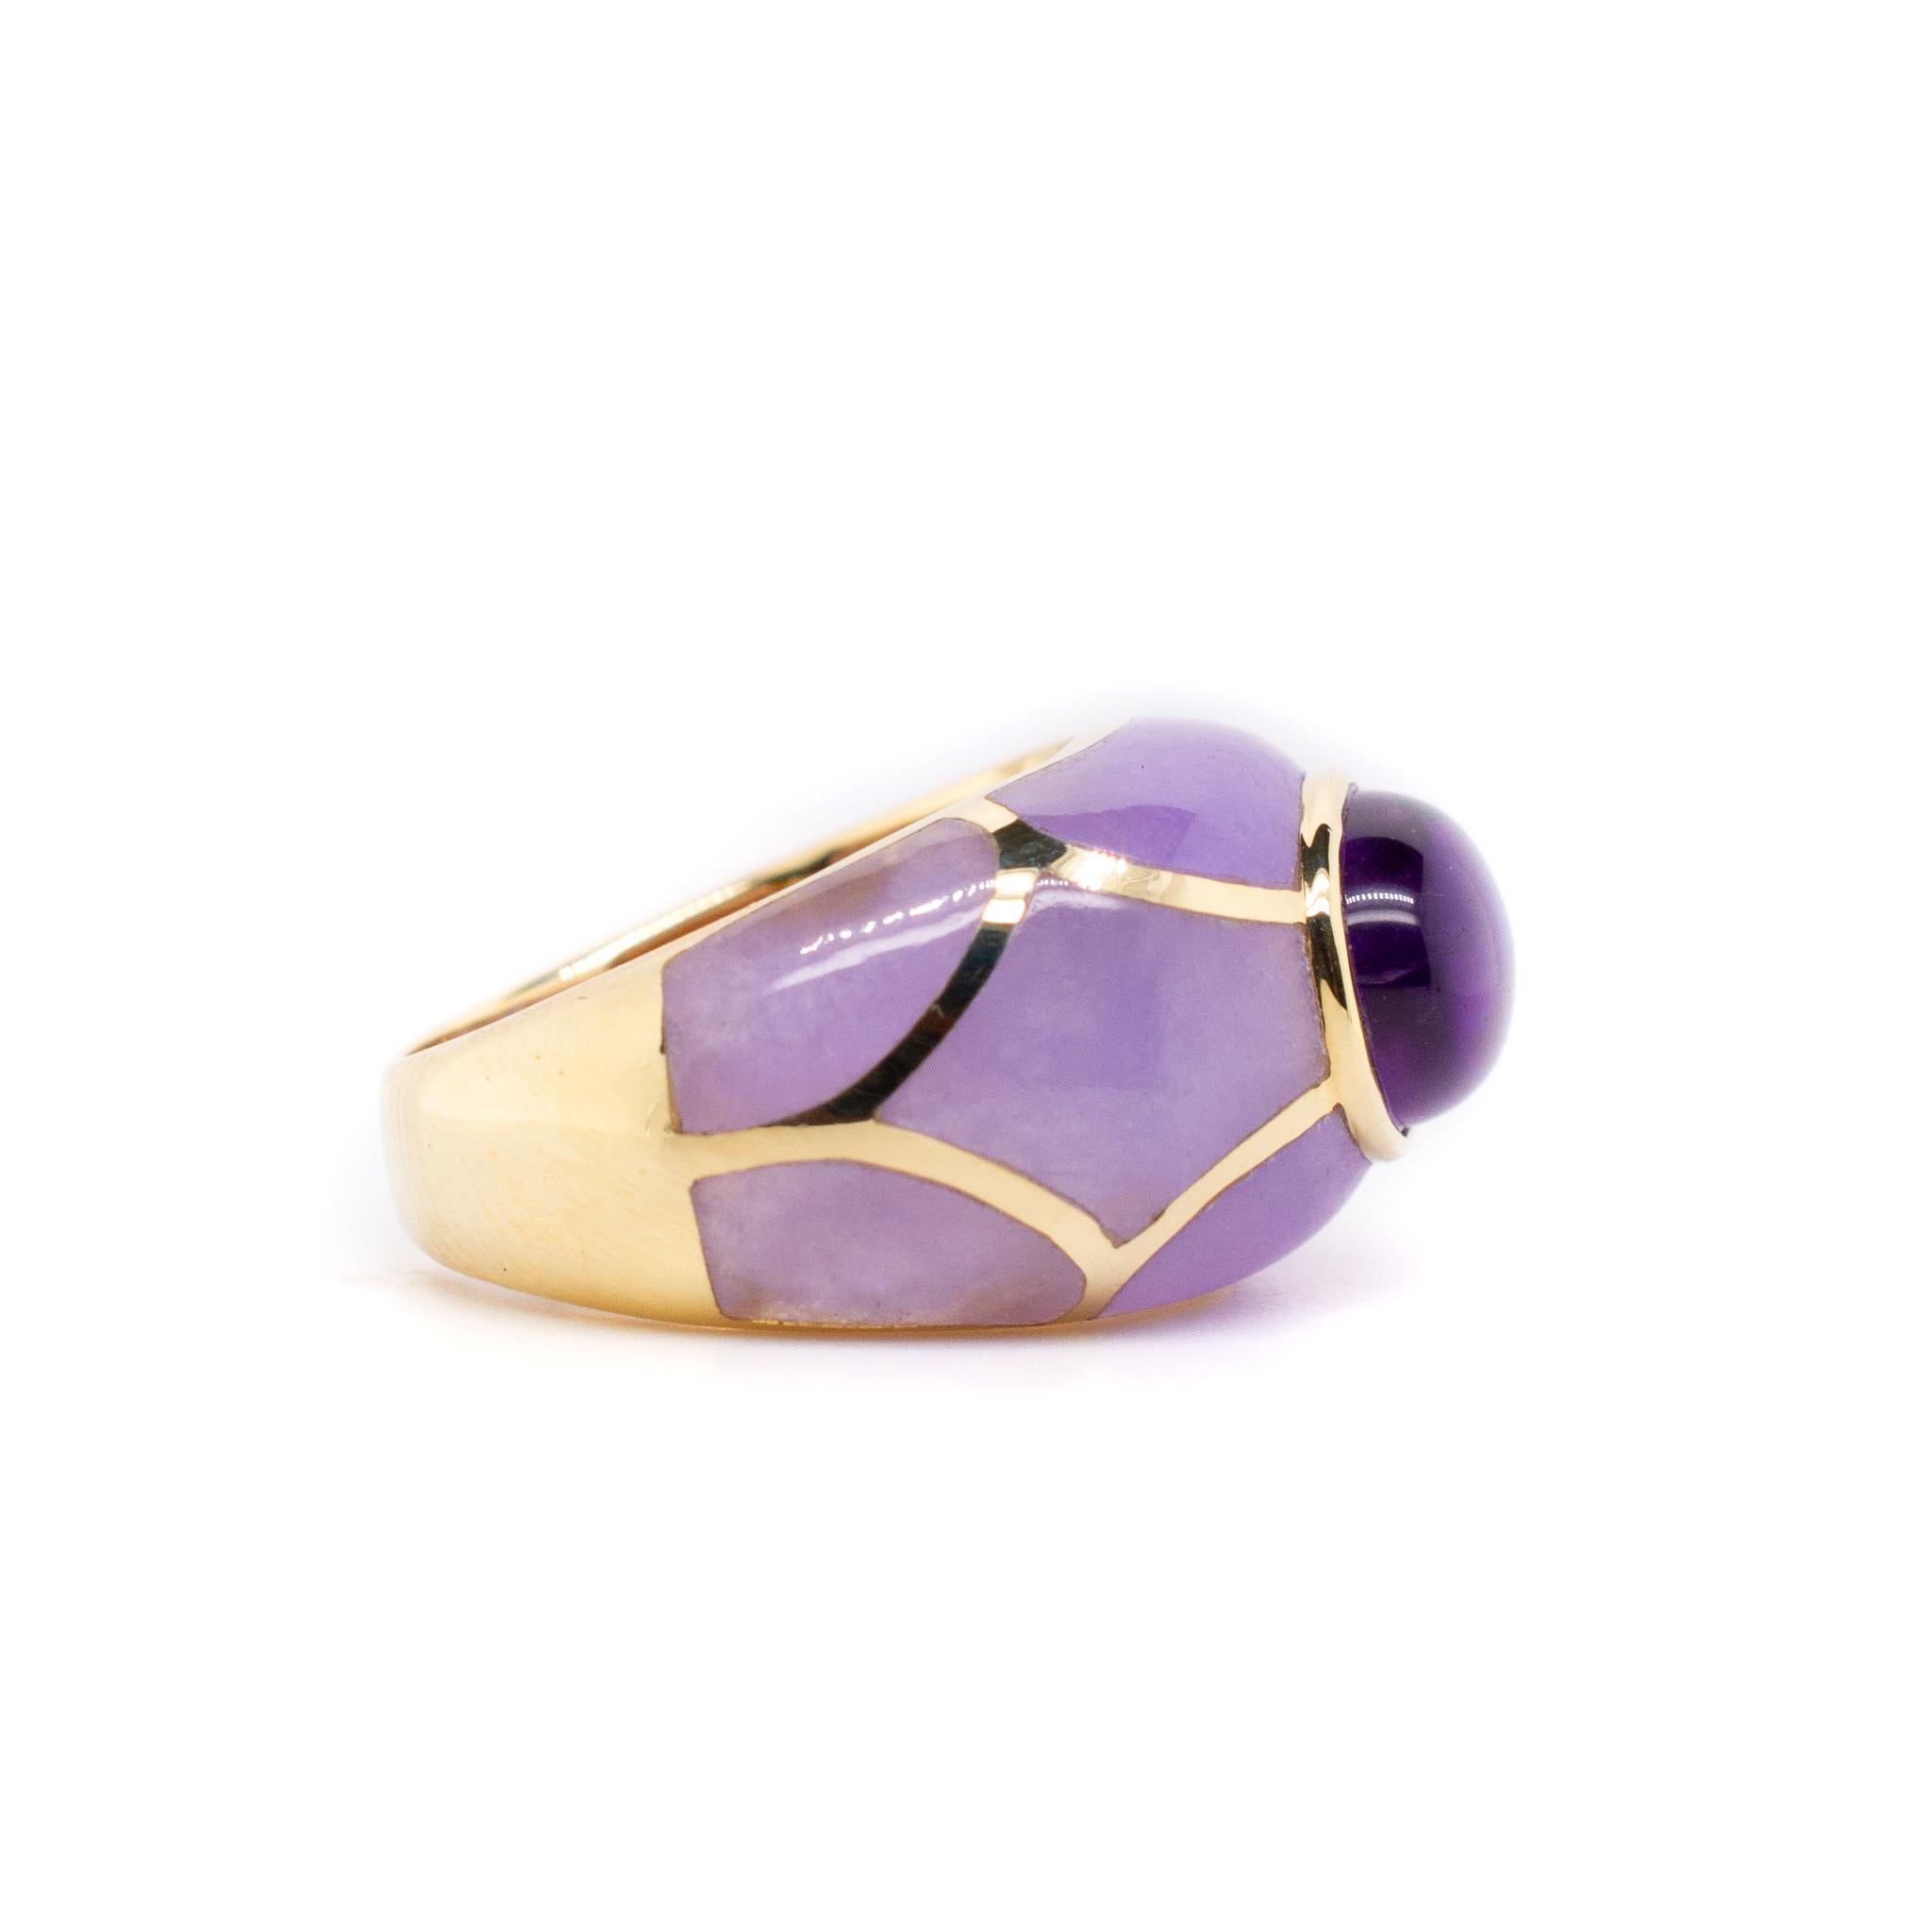 One lady's custom made polished 14K yellow gold, amethyst cocktail ring with a half round shank. The ring is a size 7. The ring weighs a total of 7.20 grams. Engraved with 